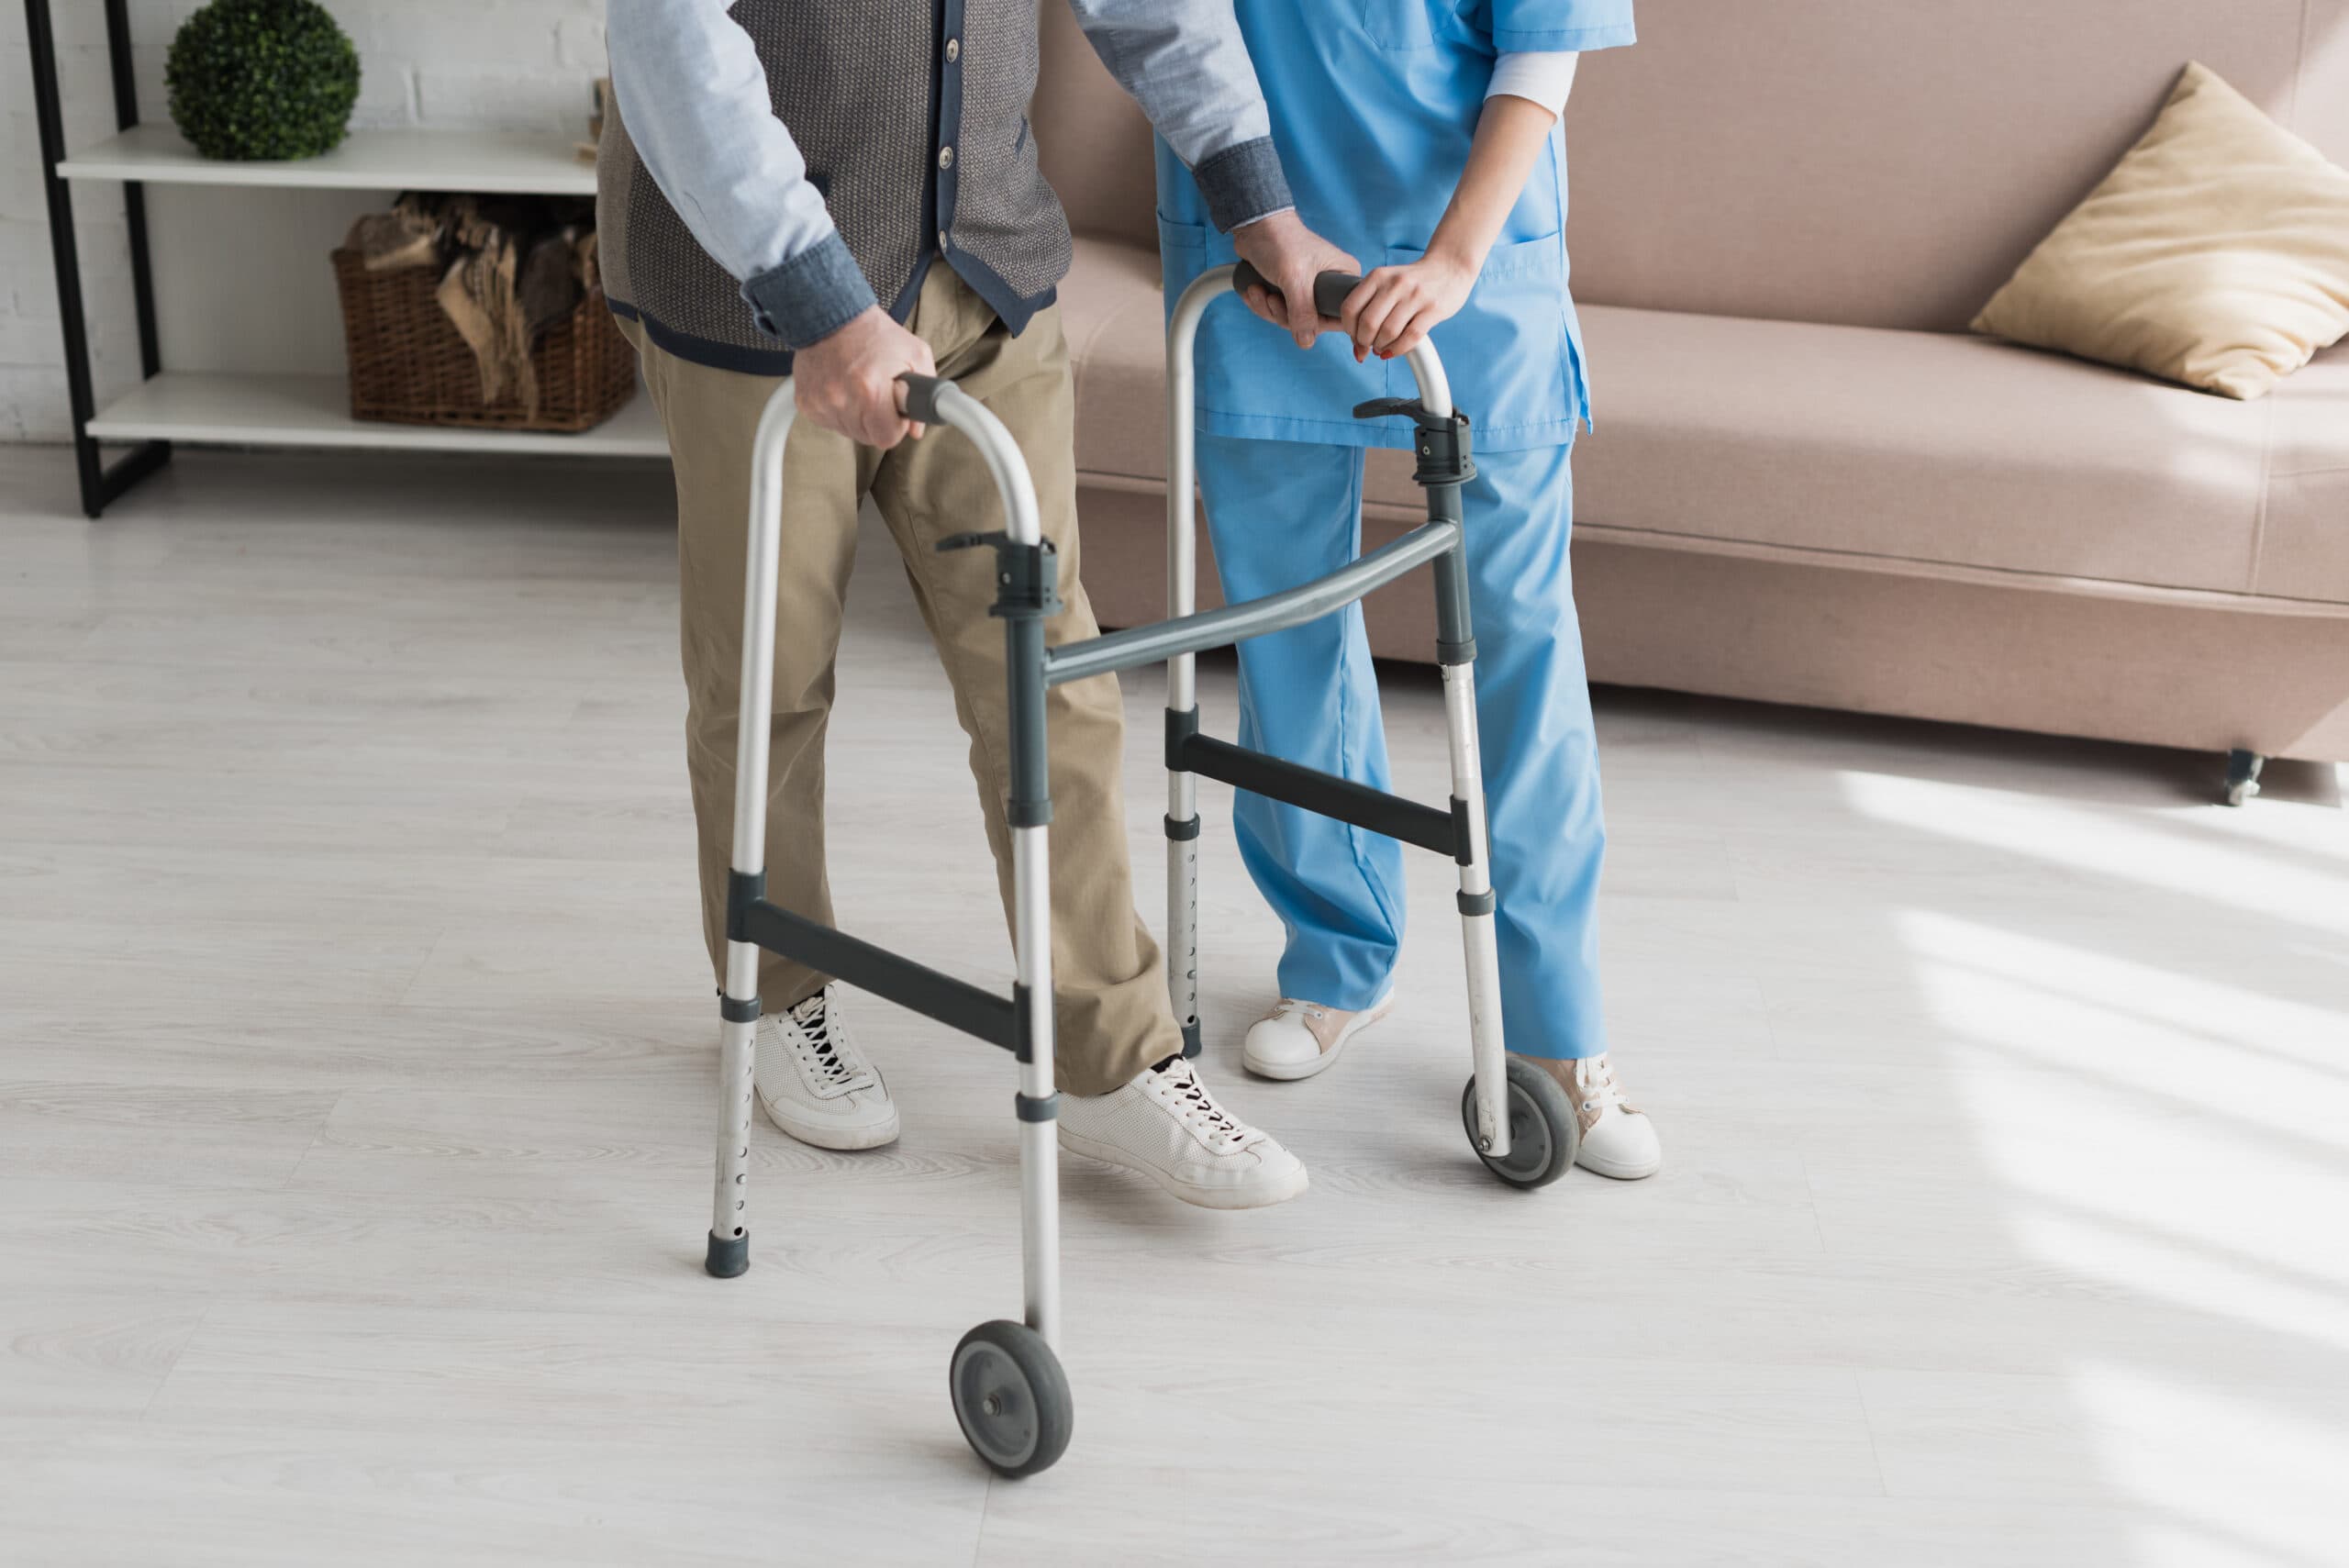 home caregiver and elderly person with walker